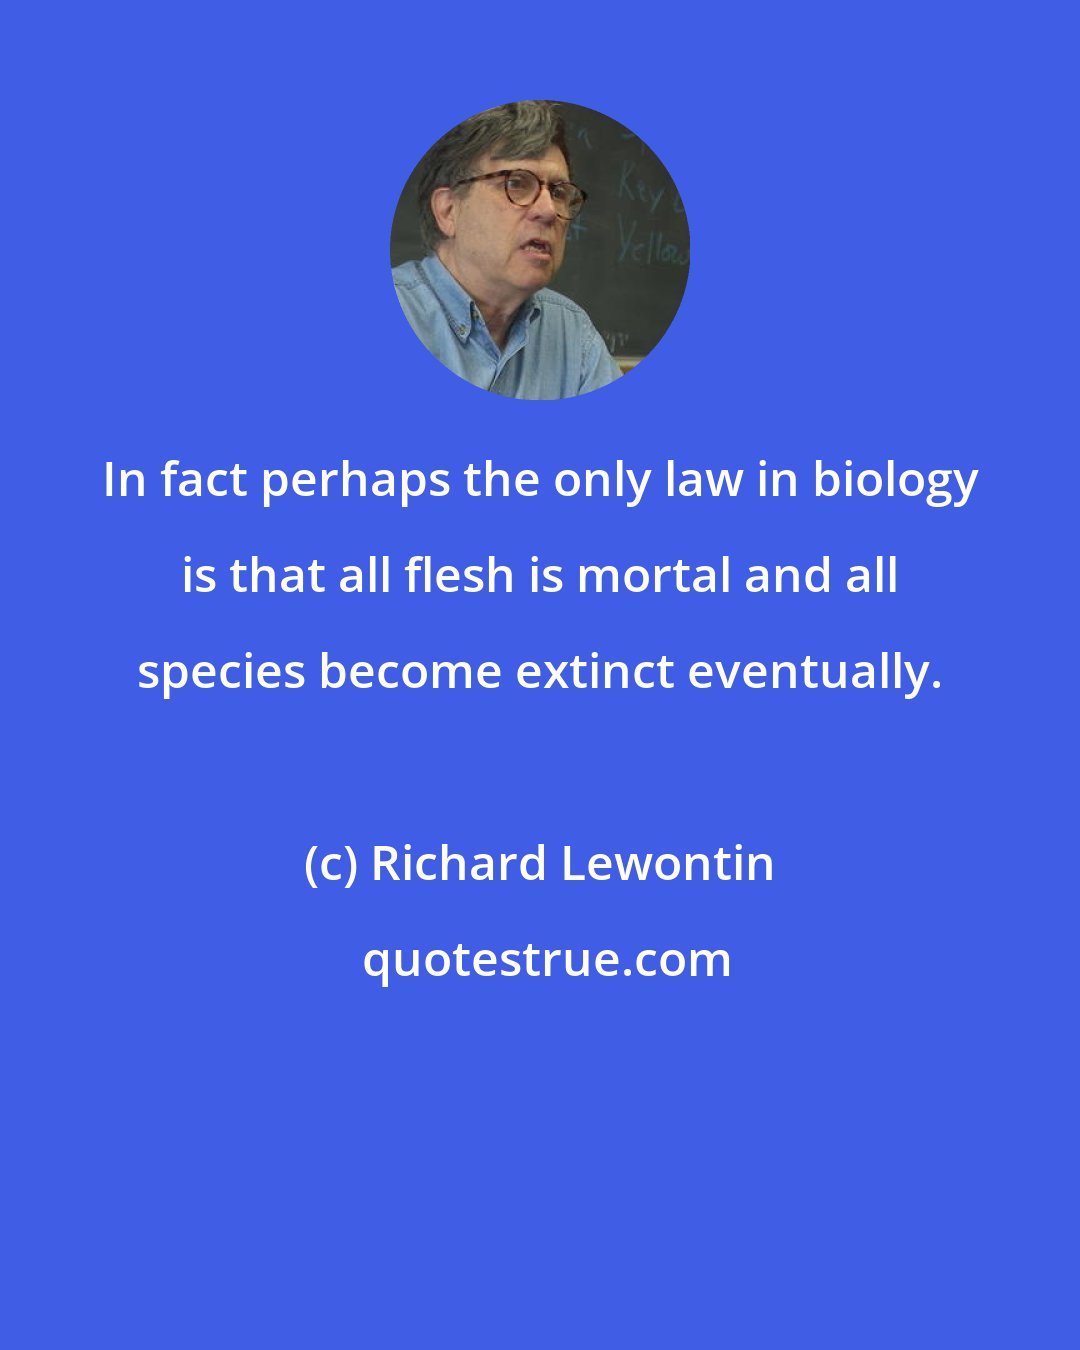 Richard Lewontin: In fact perhaps the only law in biology is that all flesh is mortal and all species become extinct eventually.